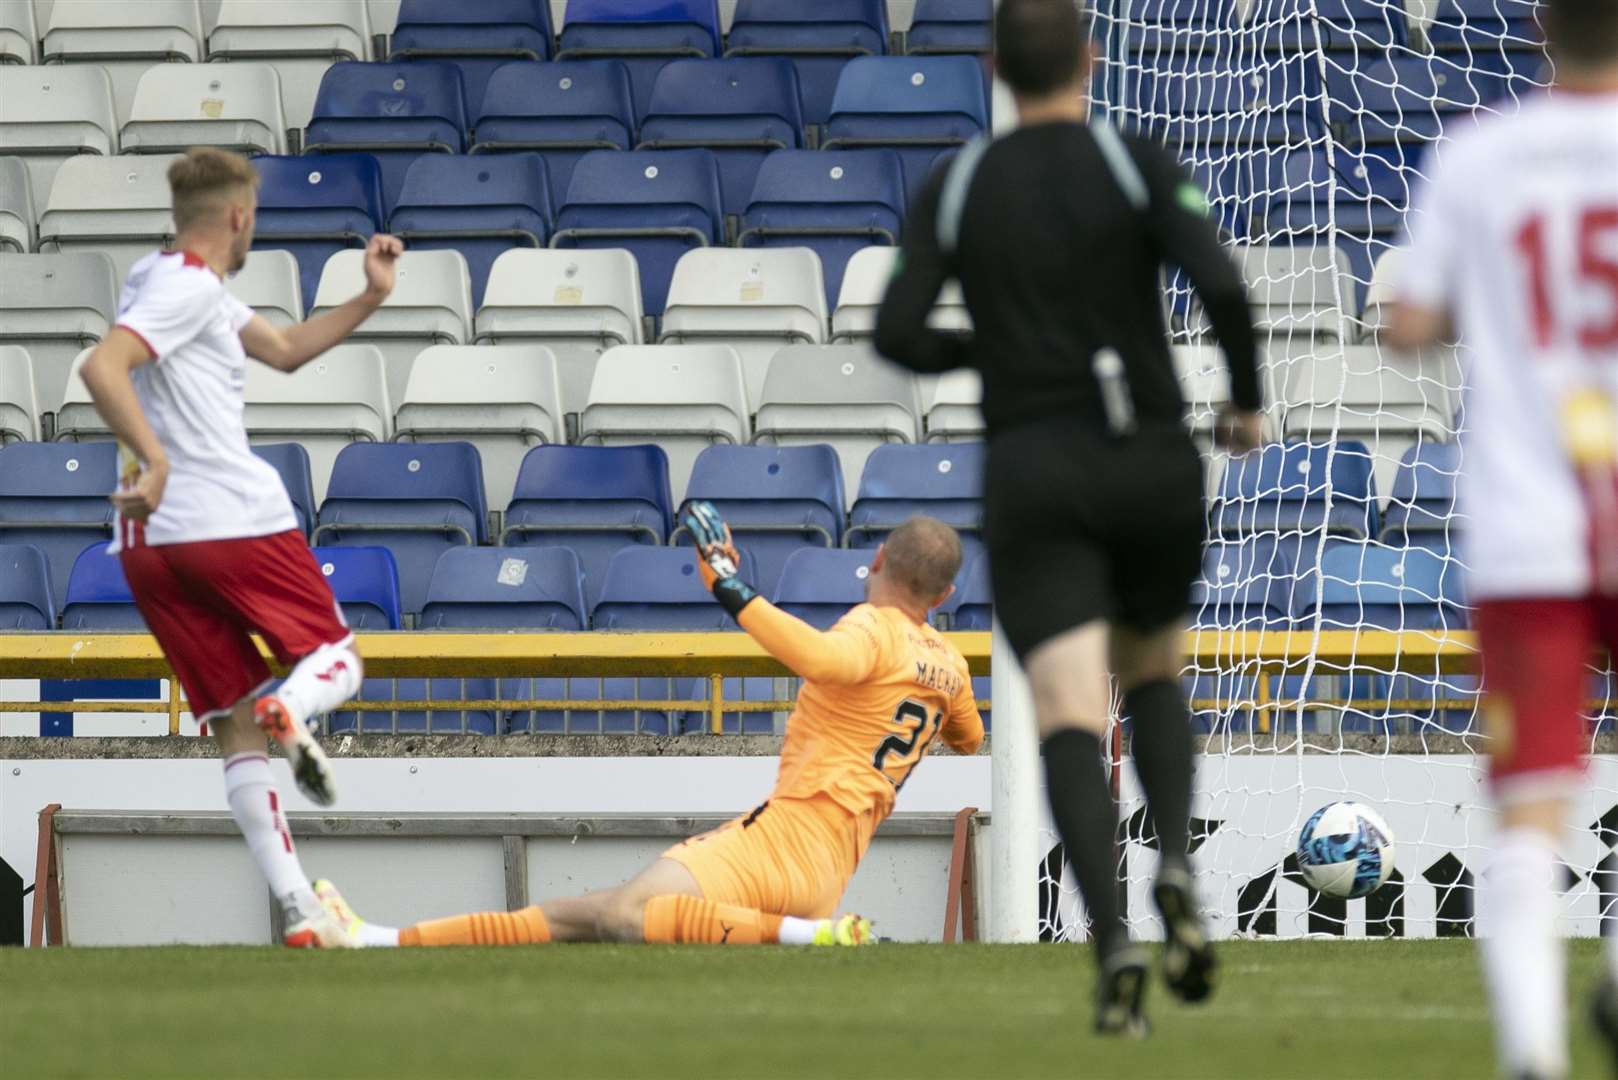 Brechin's Grady McGrath scores past ICT goalkeeper Cameron Mackay to bring the deficit back to a single goal. Picture: Ken Macpherson